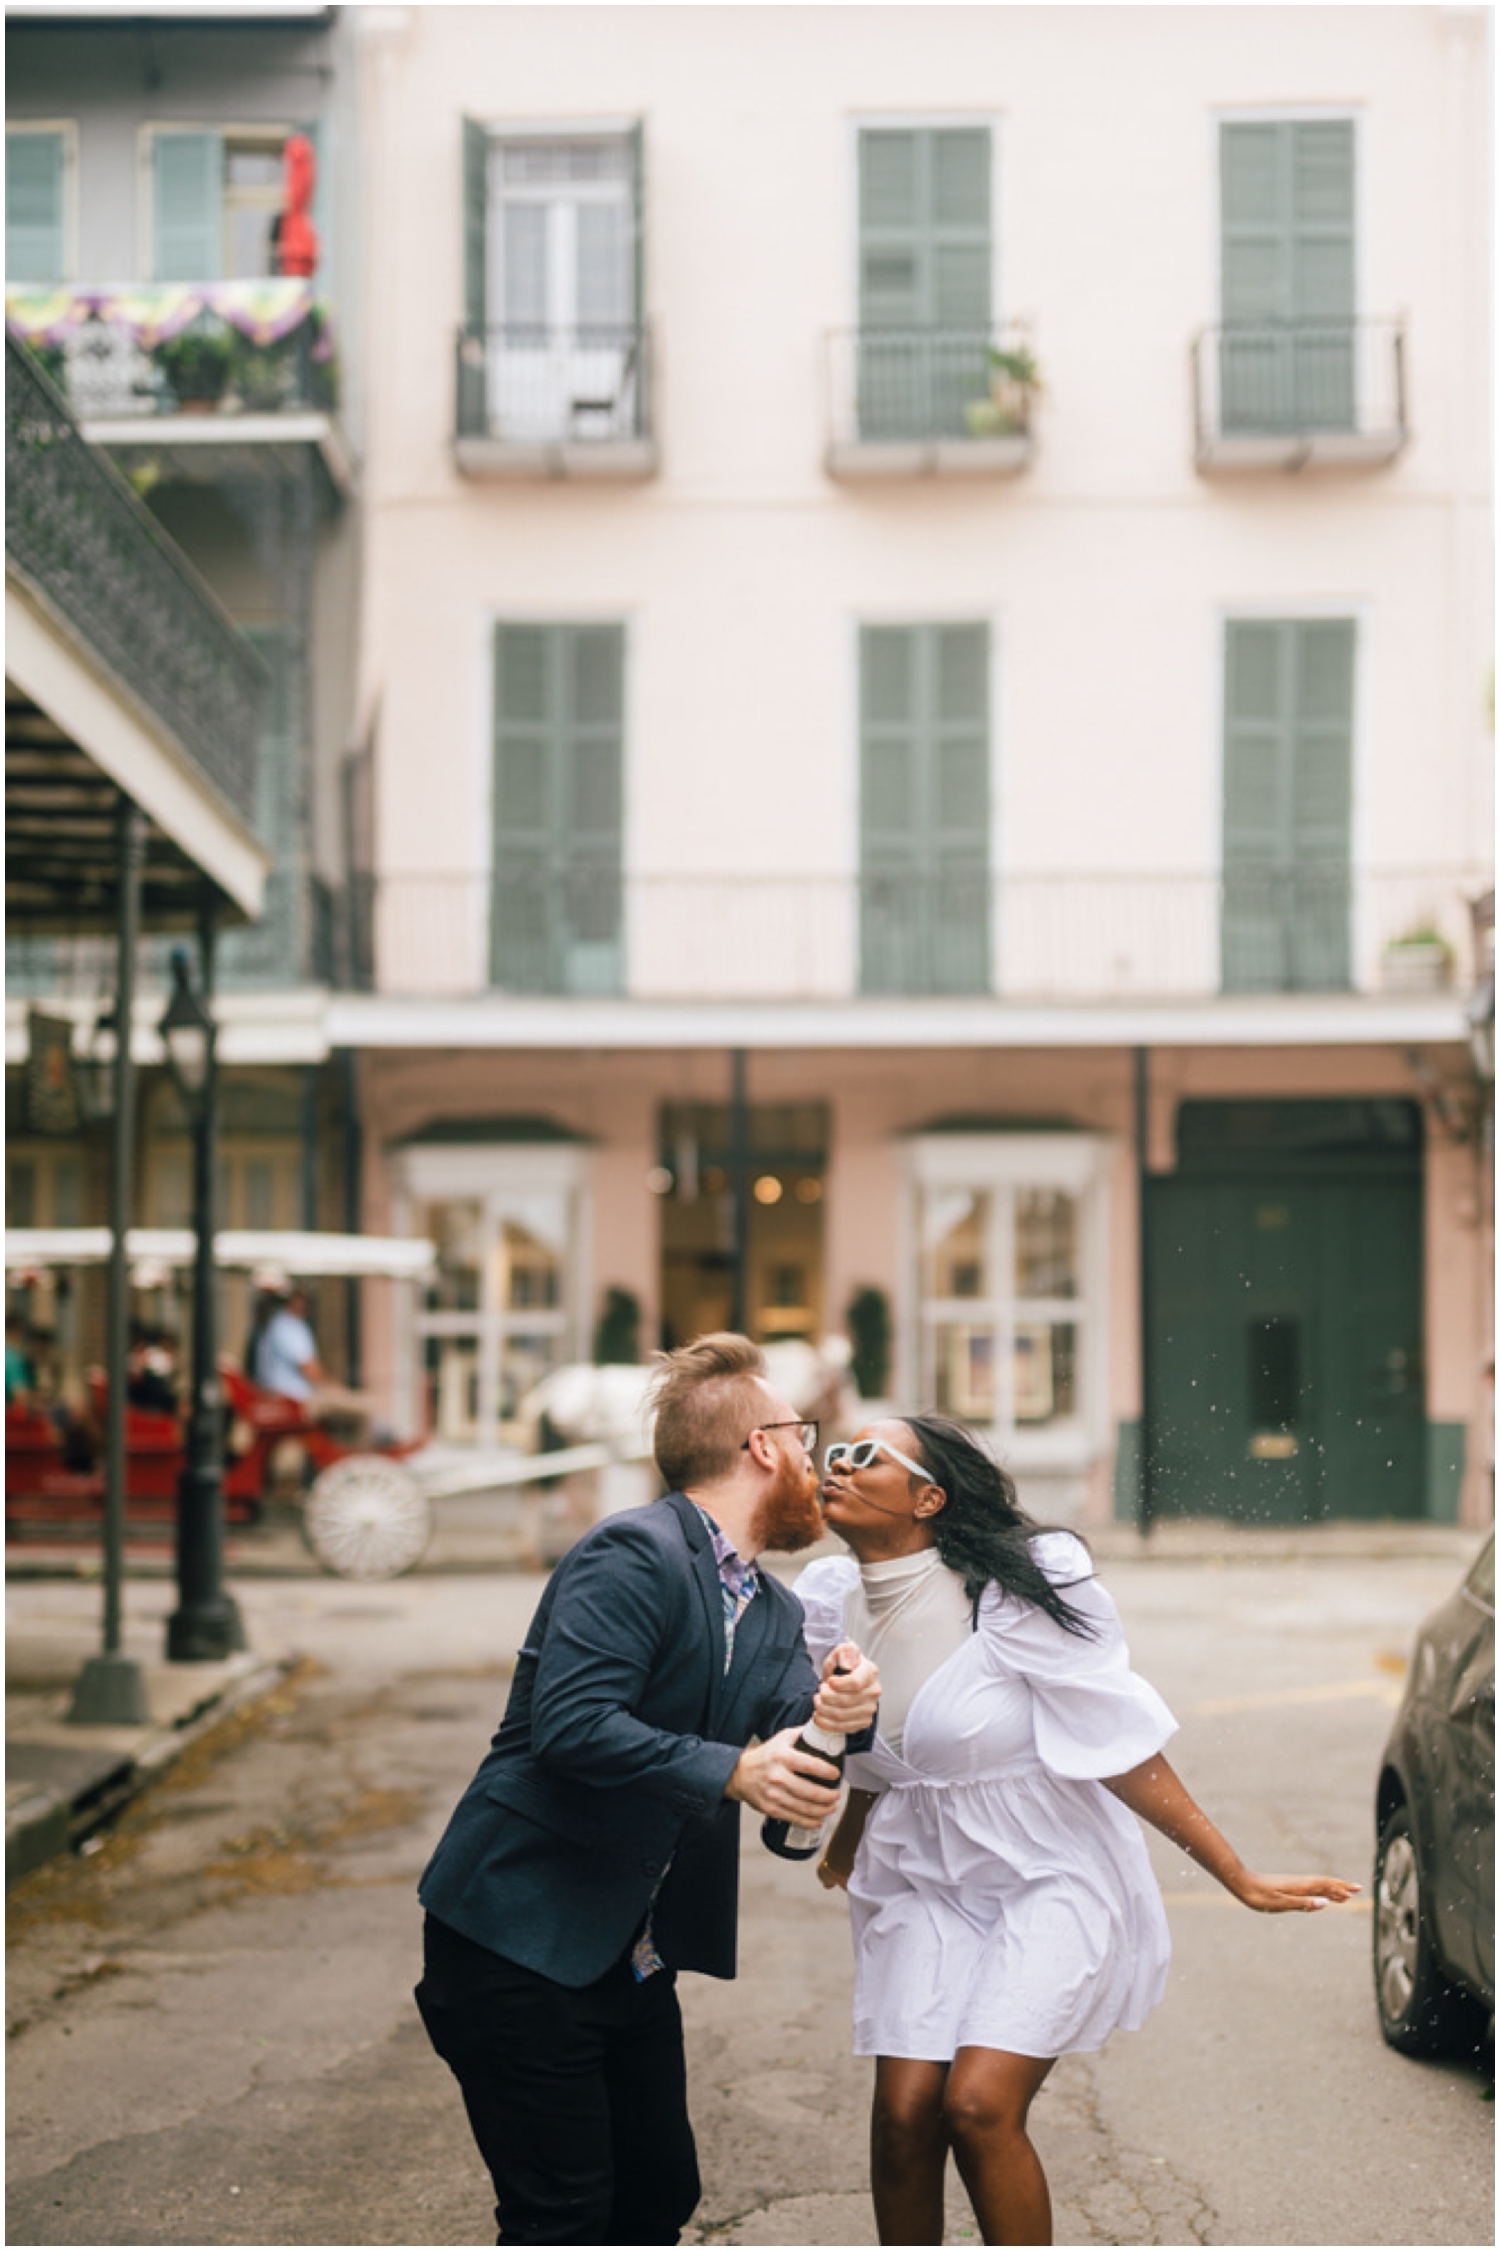 Dan and Paris kiss over the open champagne bottle in their spring engagement photo.